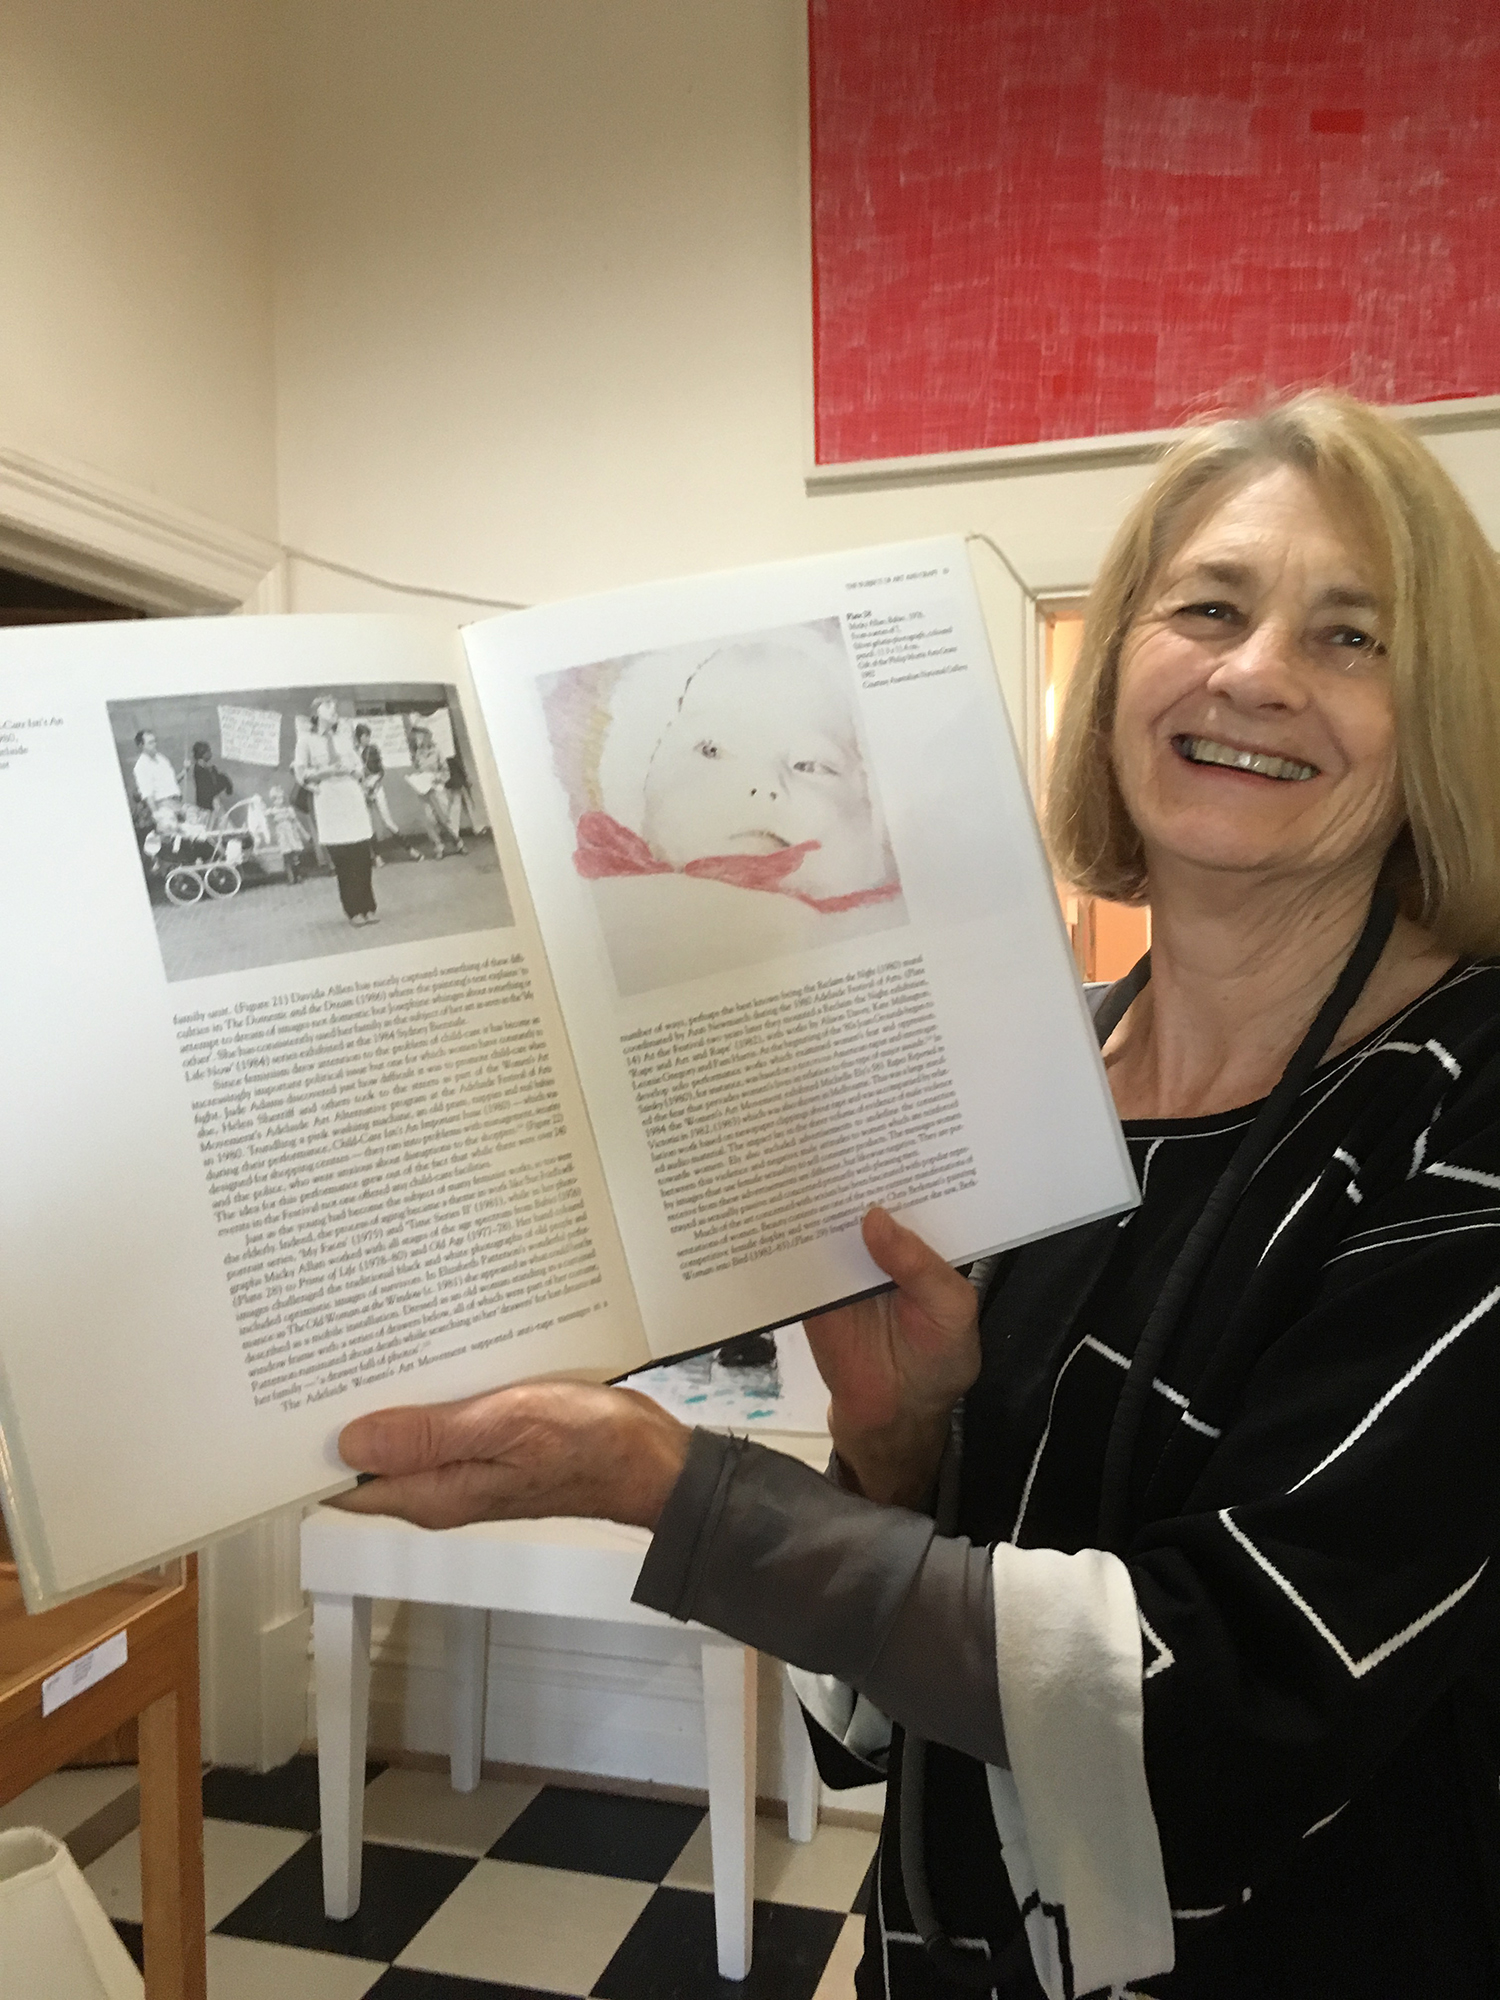 Photograph of a person with short blonde hair, smiling and holding open a book to the camera